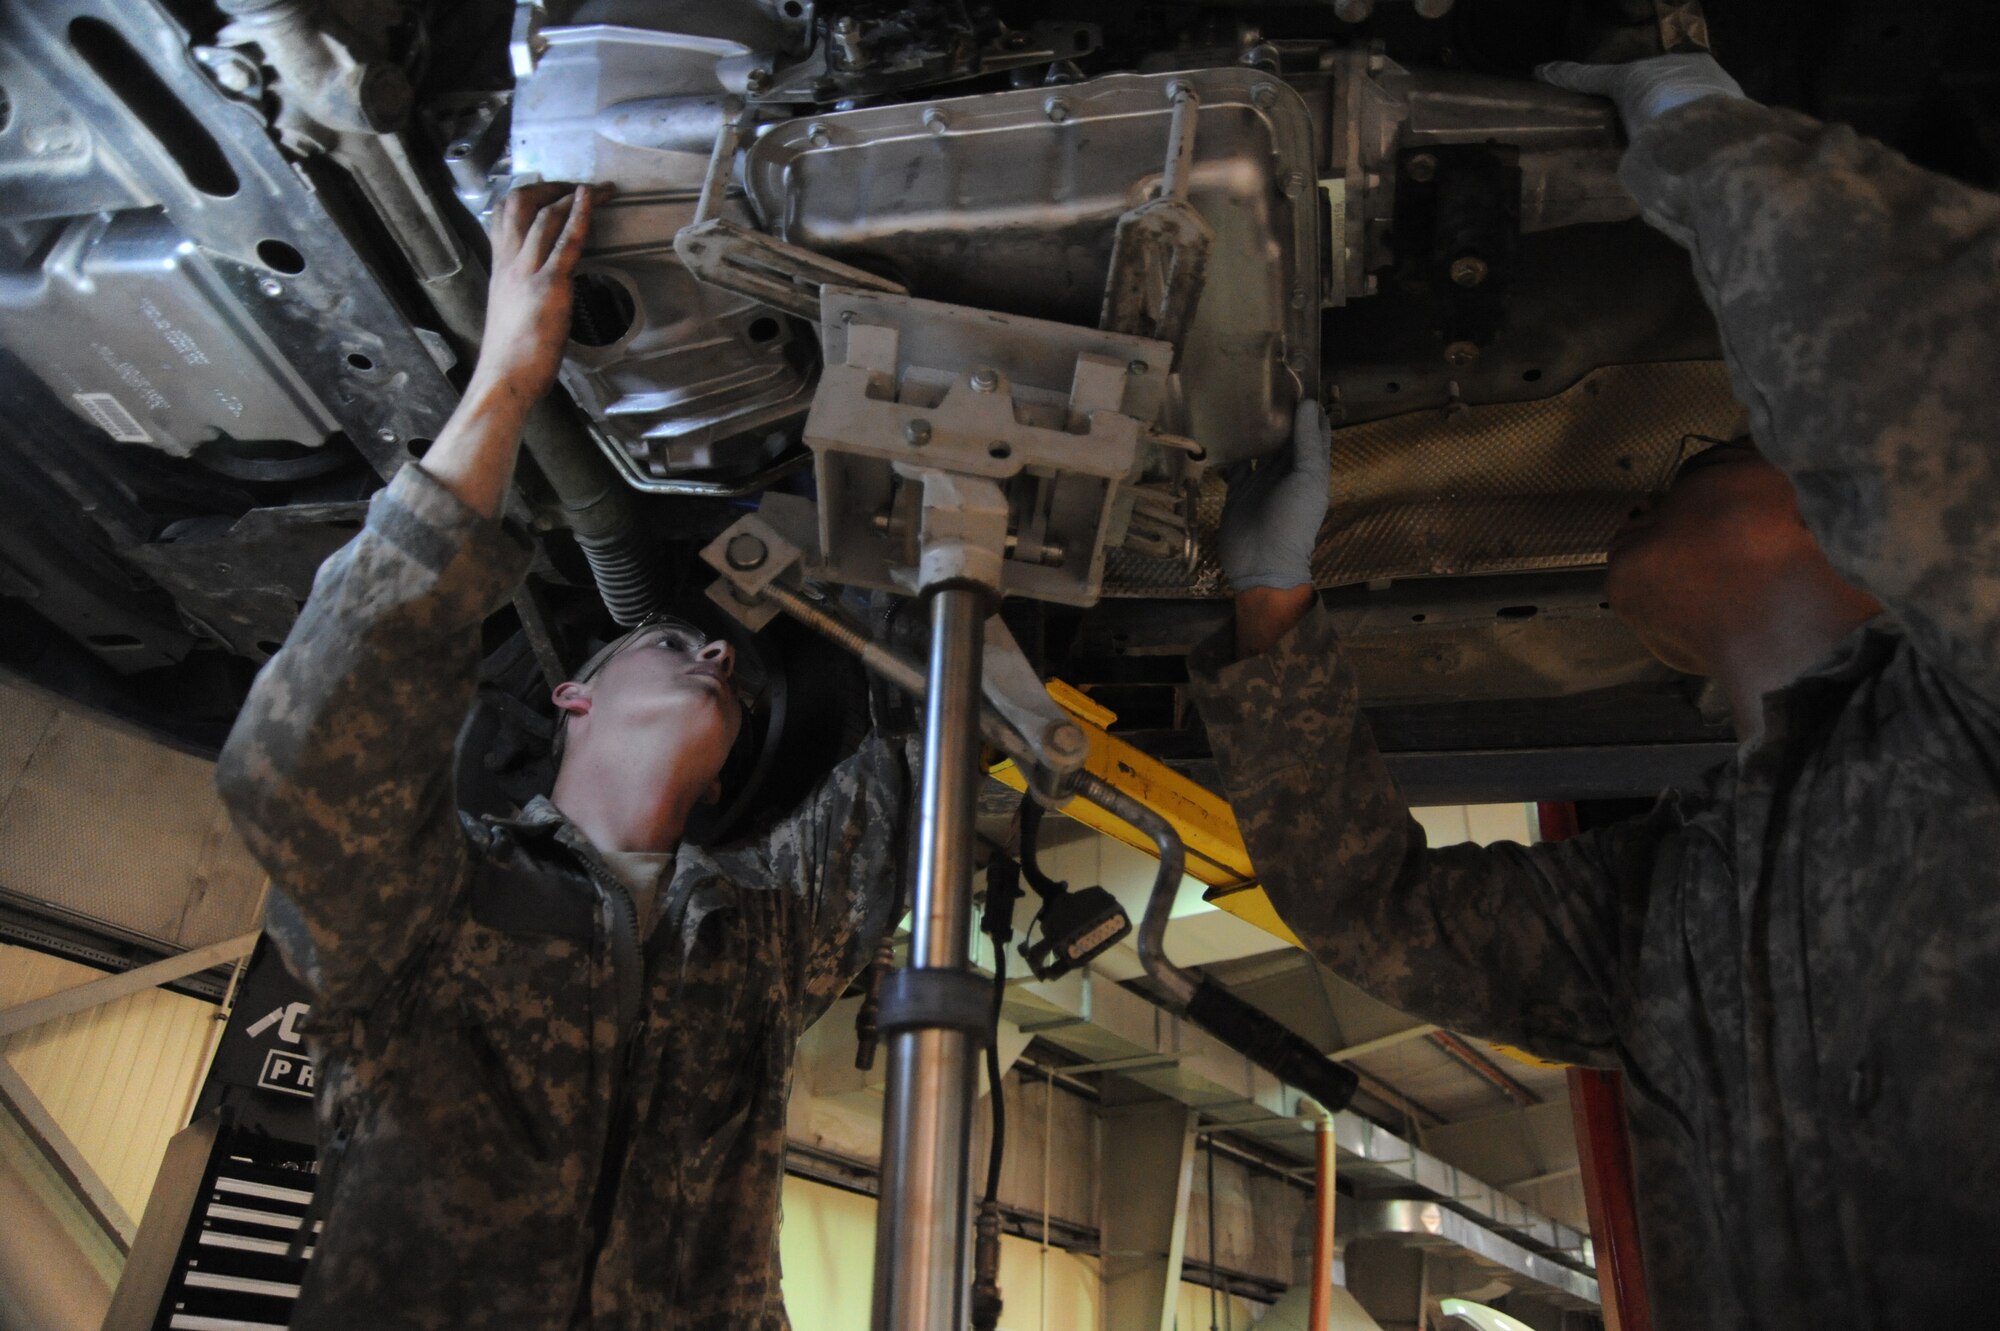 Senior Airman Adam Owens and Senior Airman Michael Jakubec, 380th Expeditionary Logistics Readiness Squadron, vehicle maintenance, raise up a new transmission into a Pontiac GTO, April 26 at an undisclosed location in Southwest Asia. The GTO is used as a chase car to help guide the U-2 Dragon Lady pilots during take-offs and landings. Airman Owens is deployed from 174th Air National Guard Base, Hancock Field, N.Y. and hails from Binghamton, N.Y. Airman Jakubec is deployed from Kadena AB, Japan and hails from Spanaway Wash.  (U.S. Air Force photo by Senior Airman Brian J. Ellis) (Released)